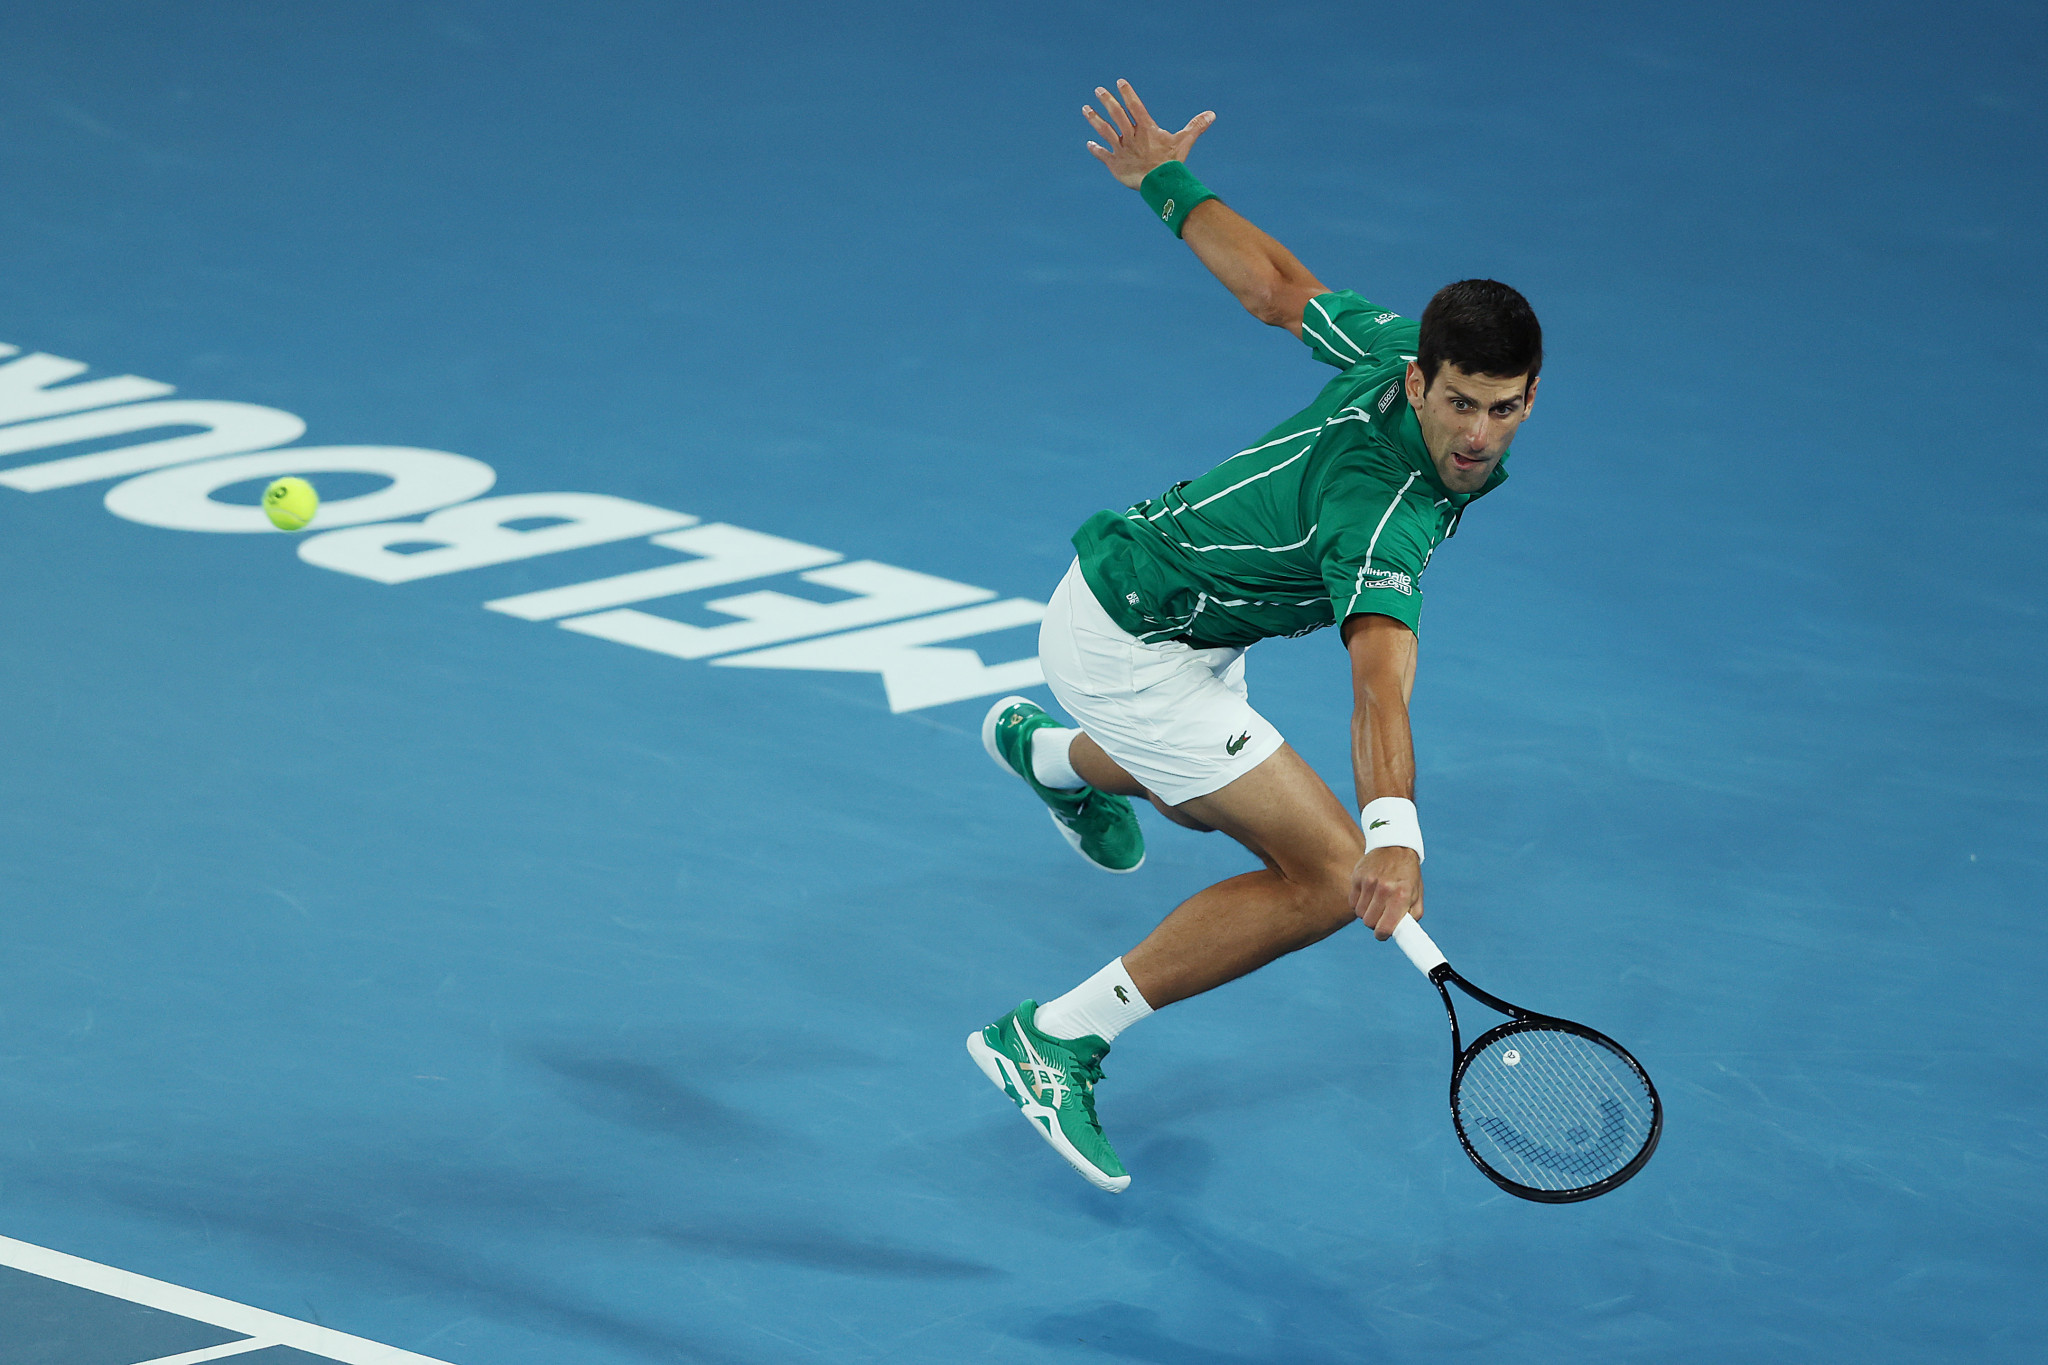 Novak Djokovic dug deep to overcome the Austrian in a gripping five-set final ©Getty Images